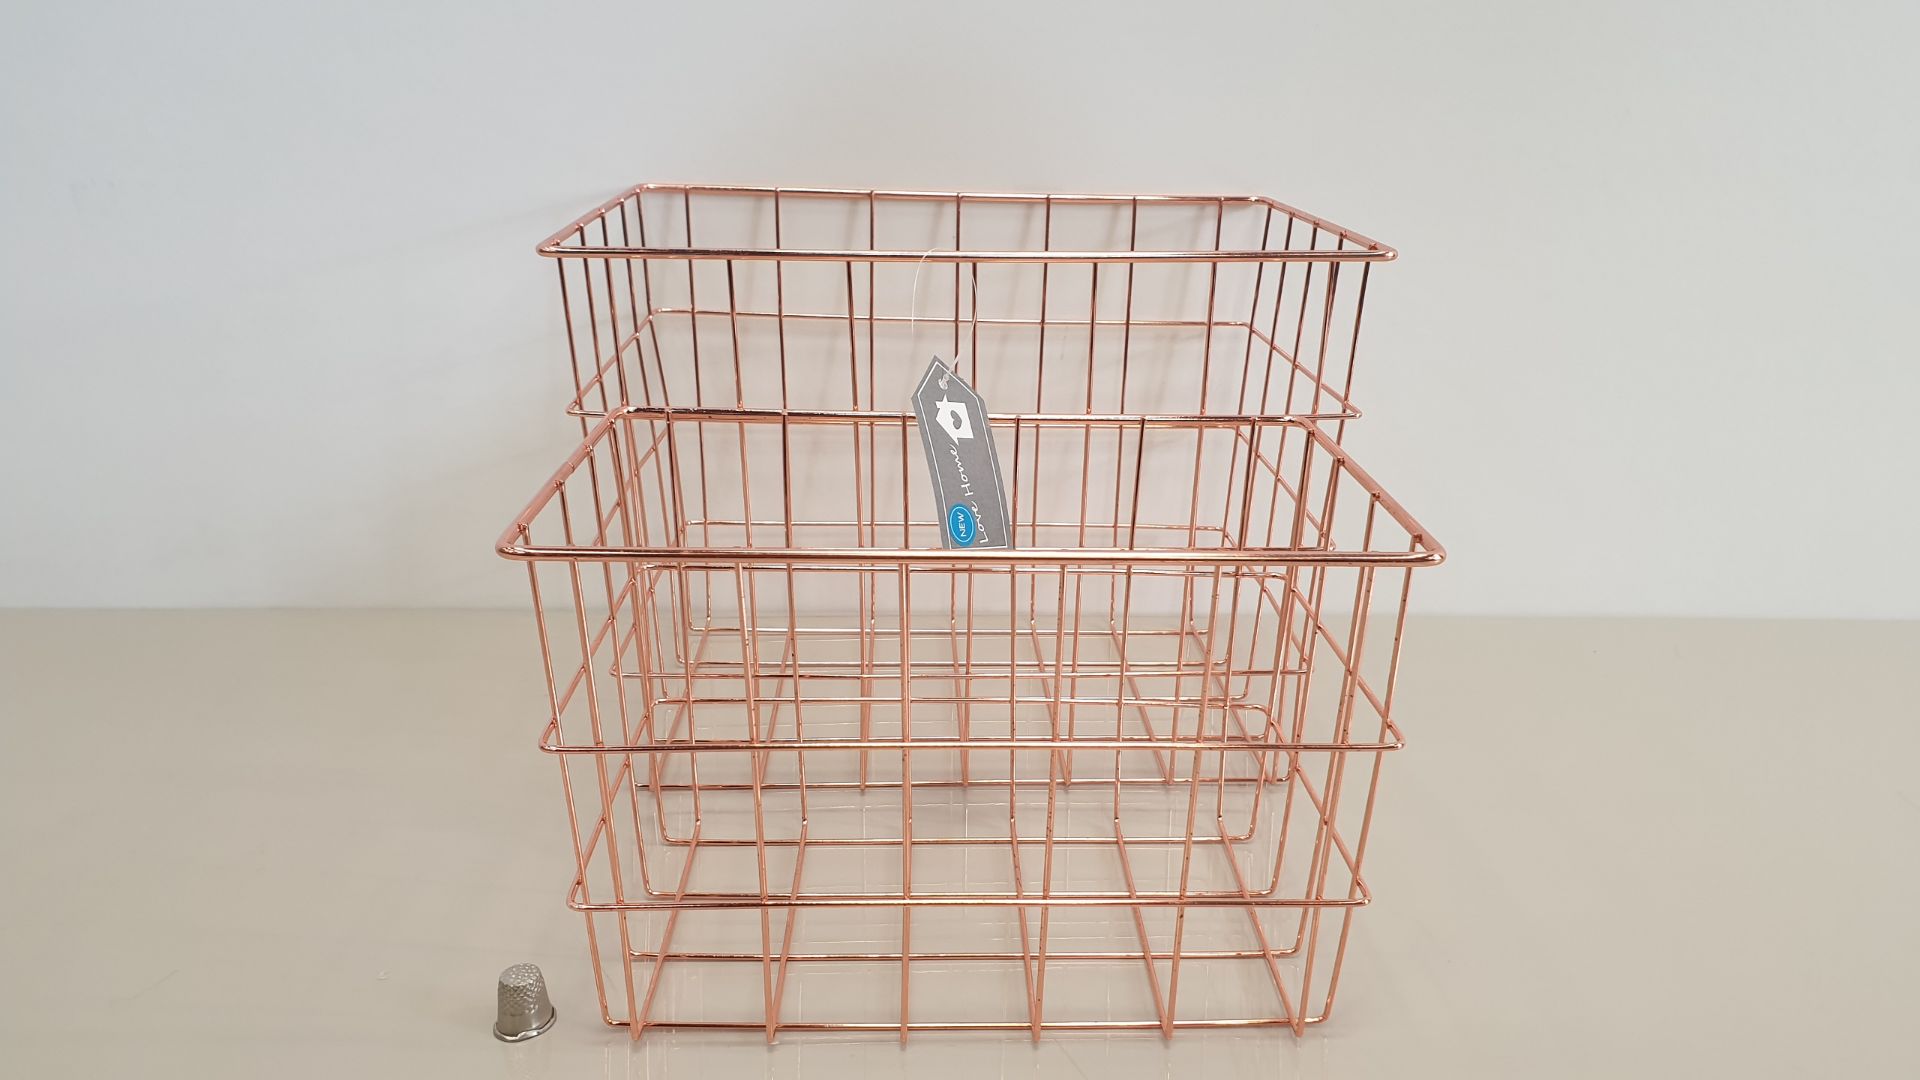 16 X SETS OF 2 COPPER WIRE BASKETS - IN 4 CARTONS